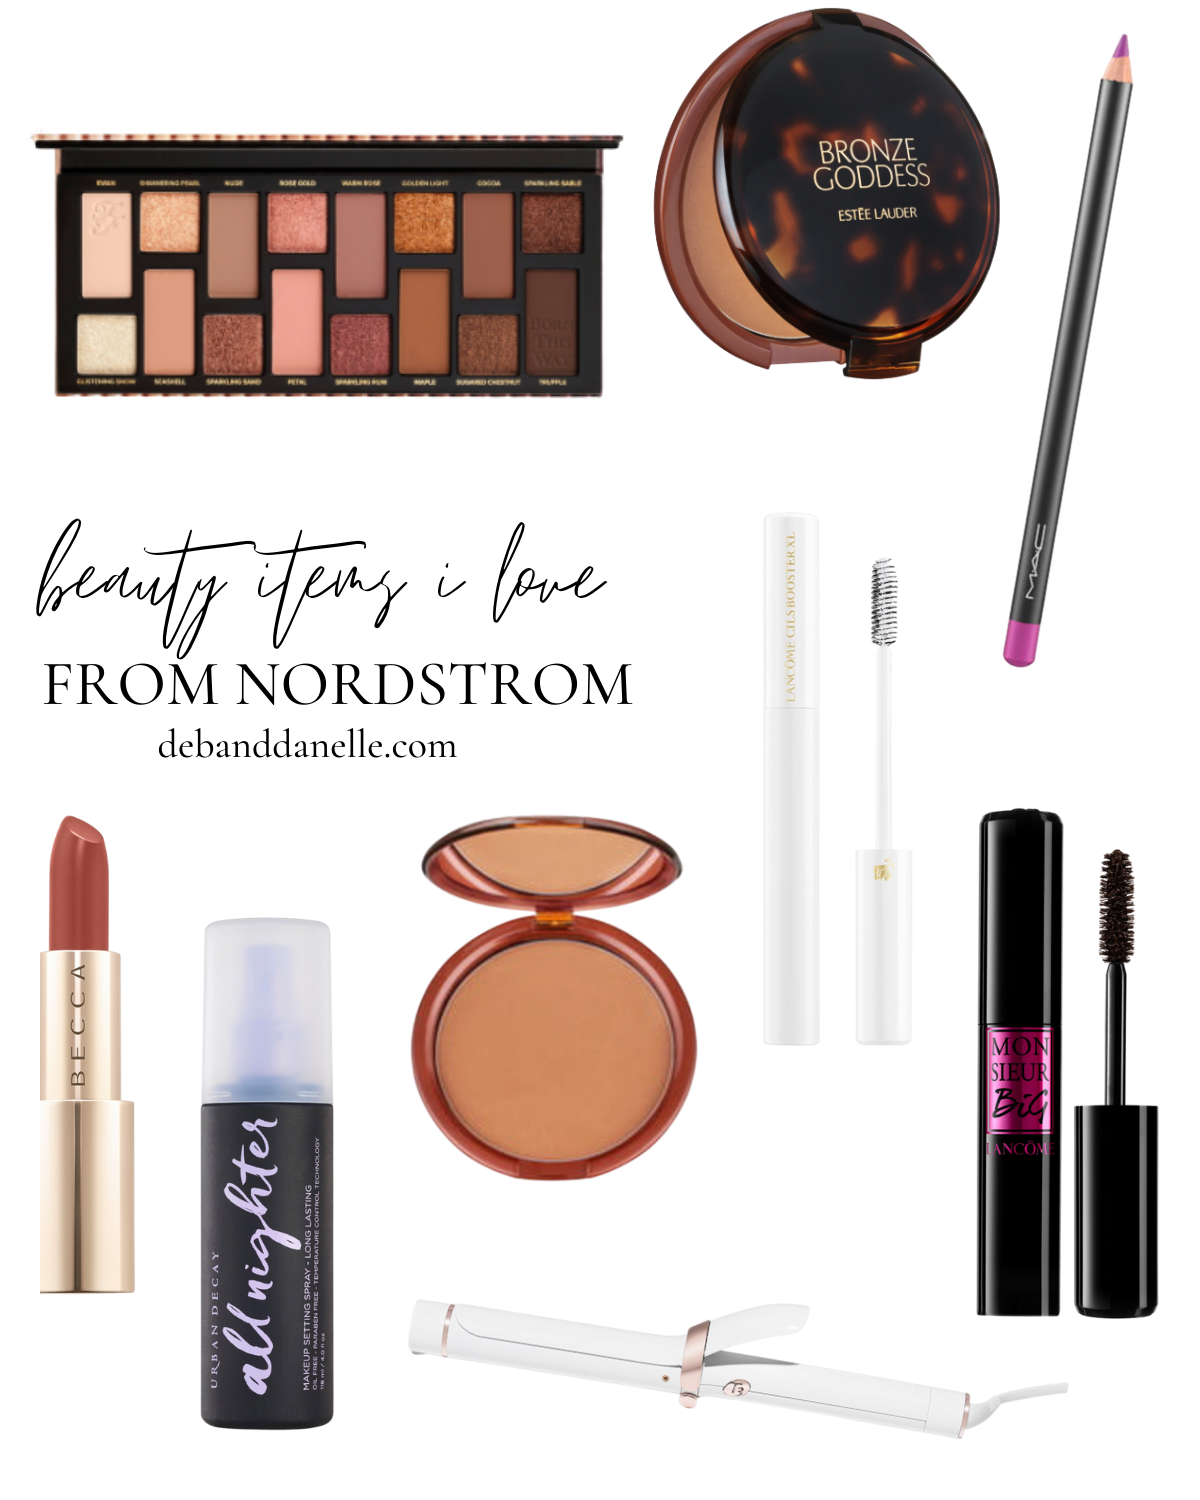 Perfect Gifts For The Beauty Lovers | Nordstrom Beauty Favorites